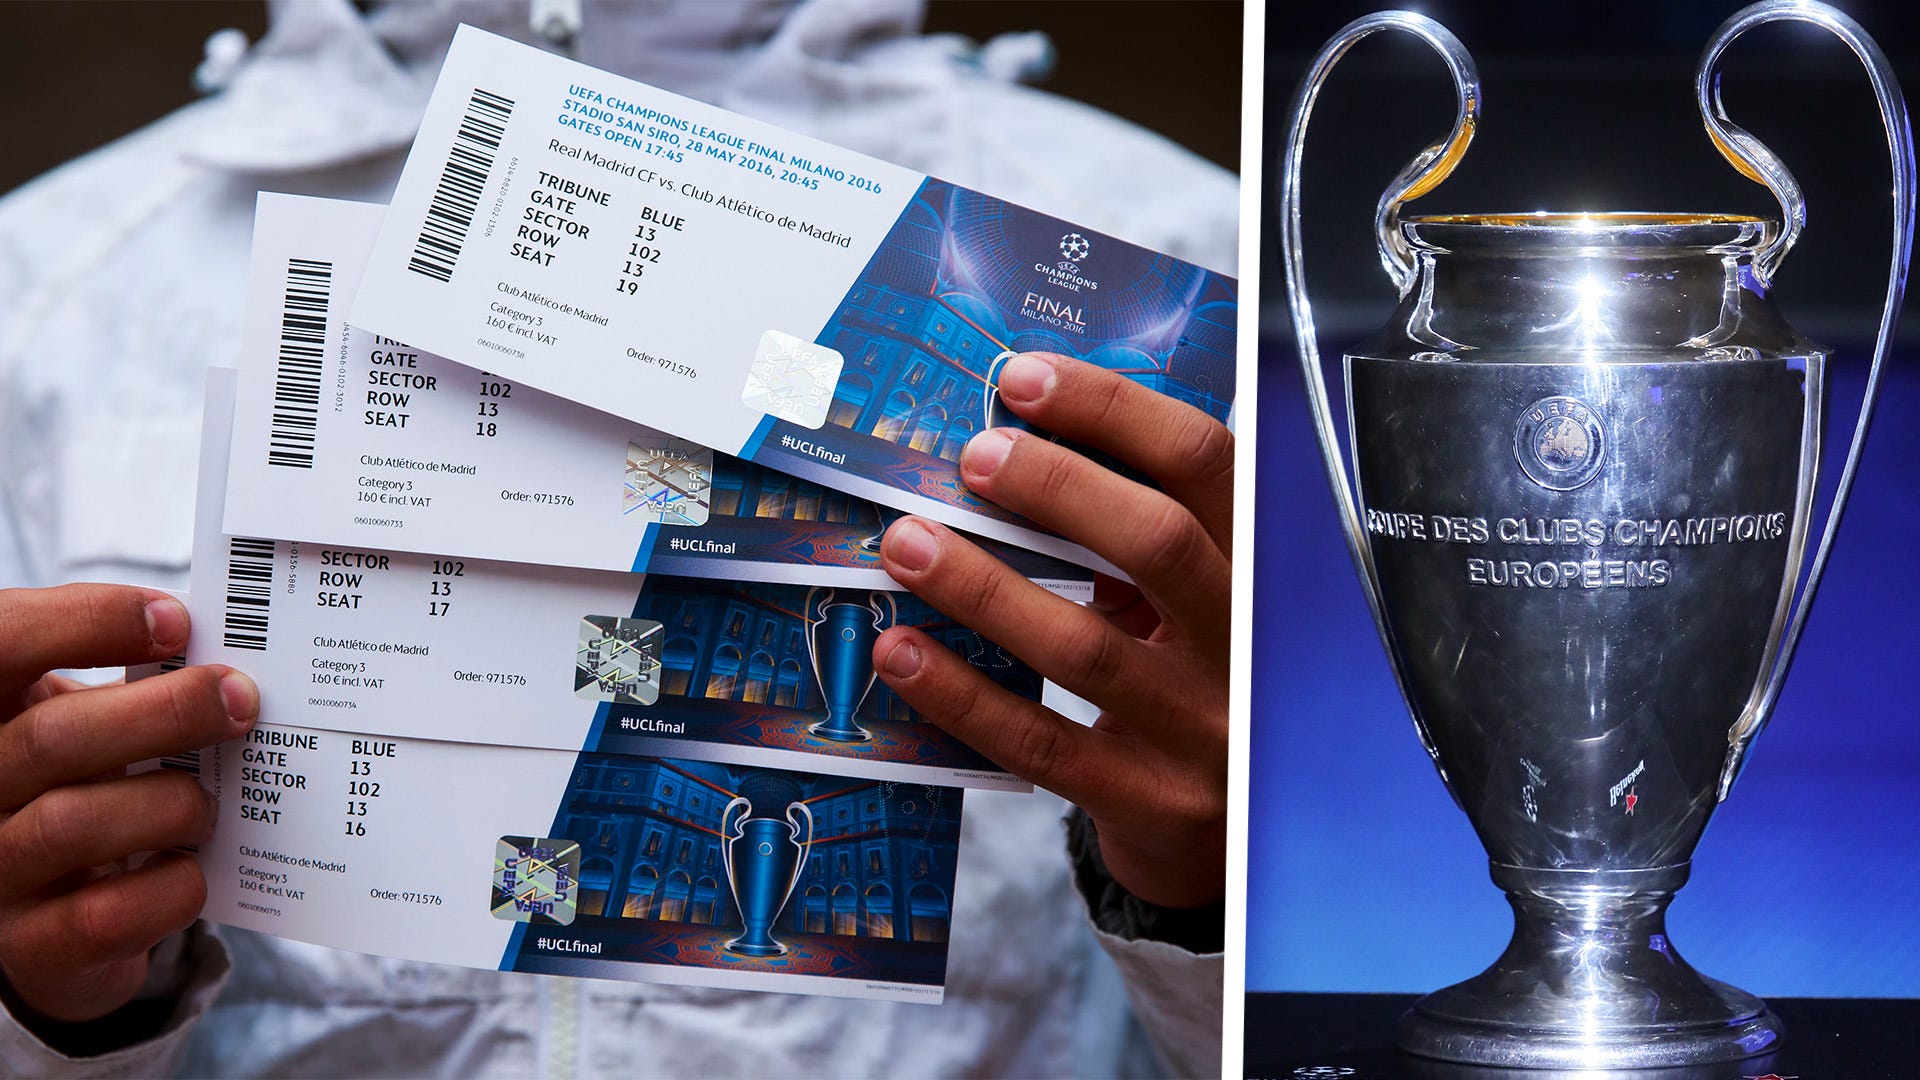 Champions League final tickets How to buy, prices, allocation & Madrid travel details